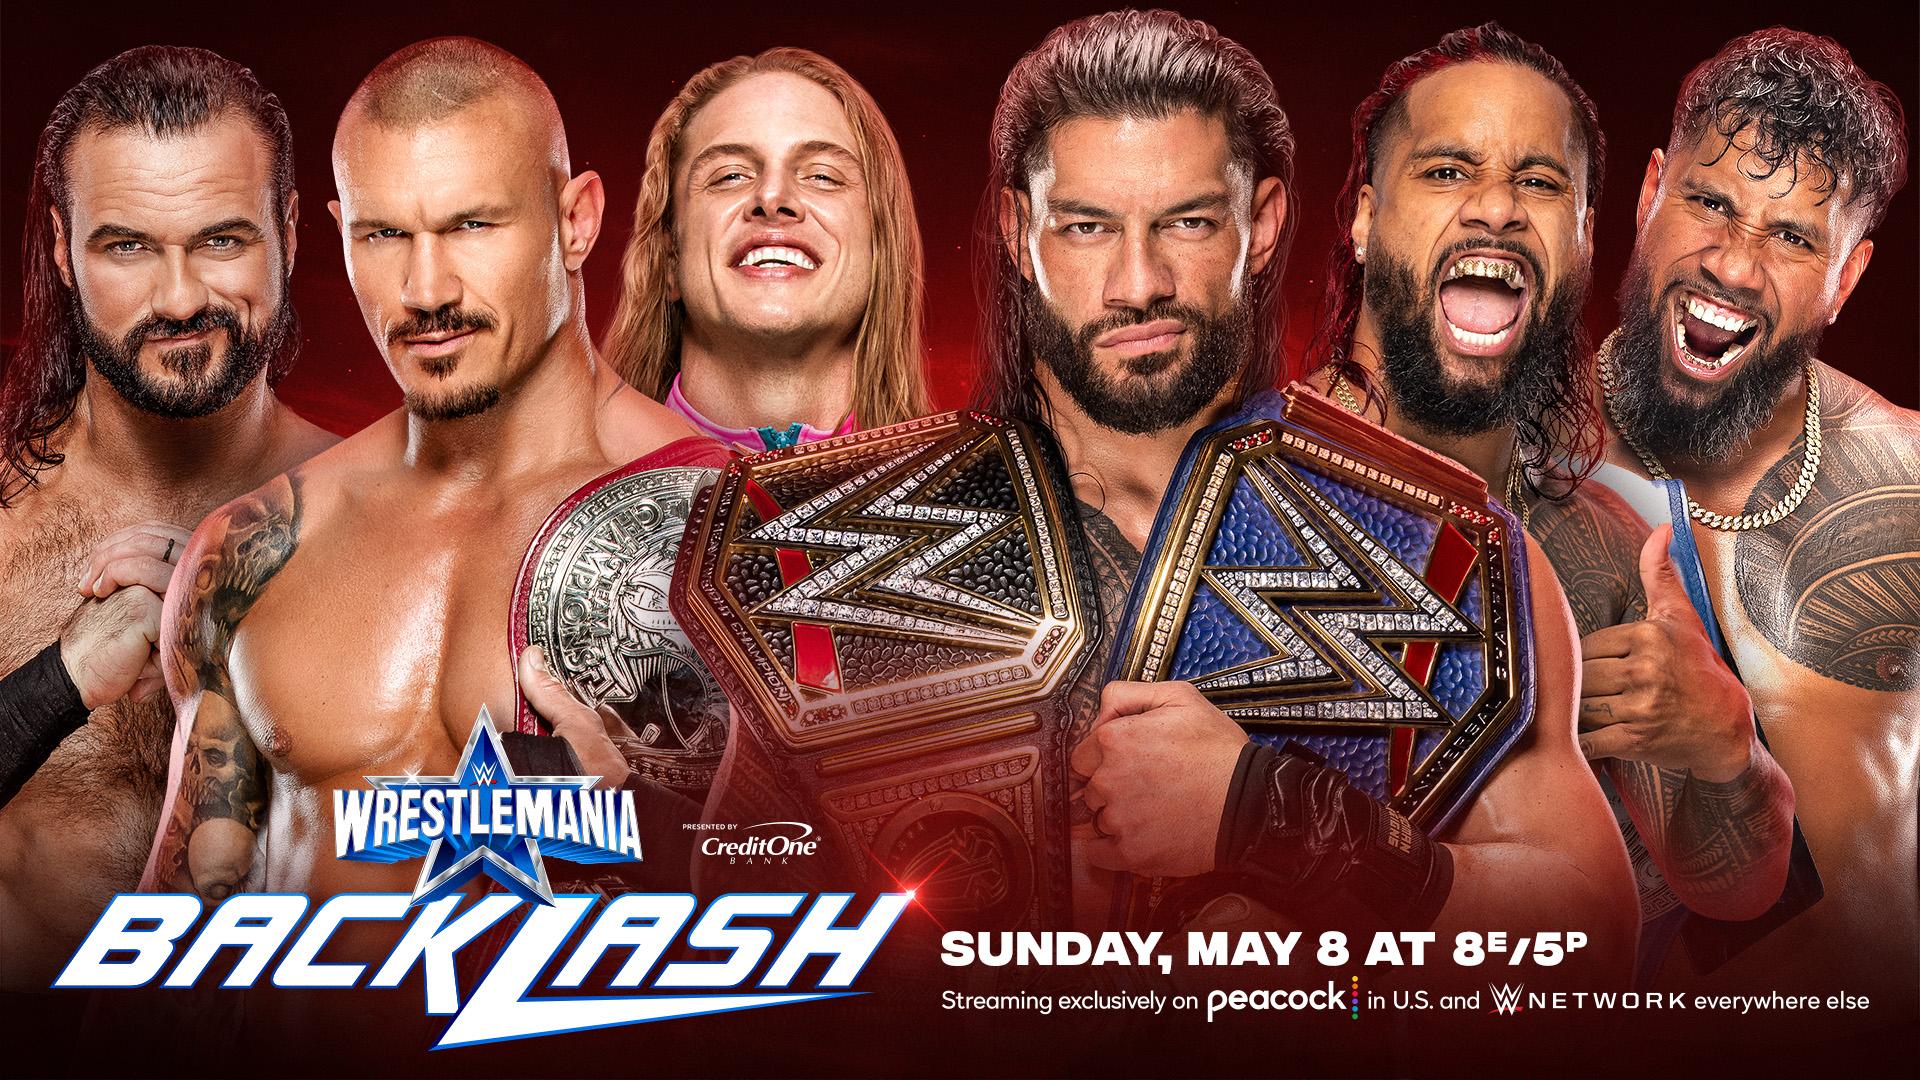 Drew McIntyre & RK-Bro will face The Usos and Roman Reigns at Backlash